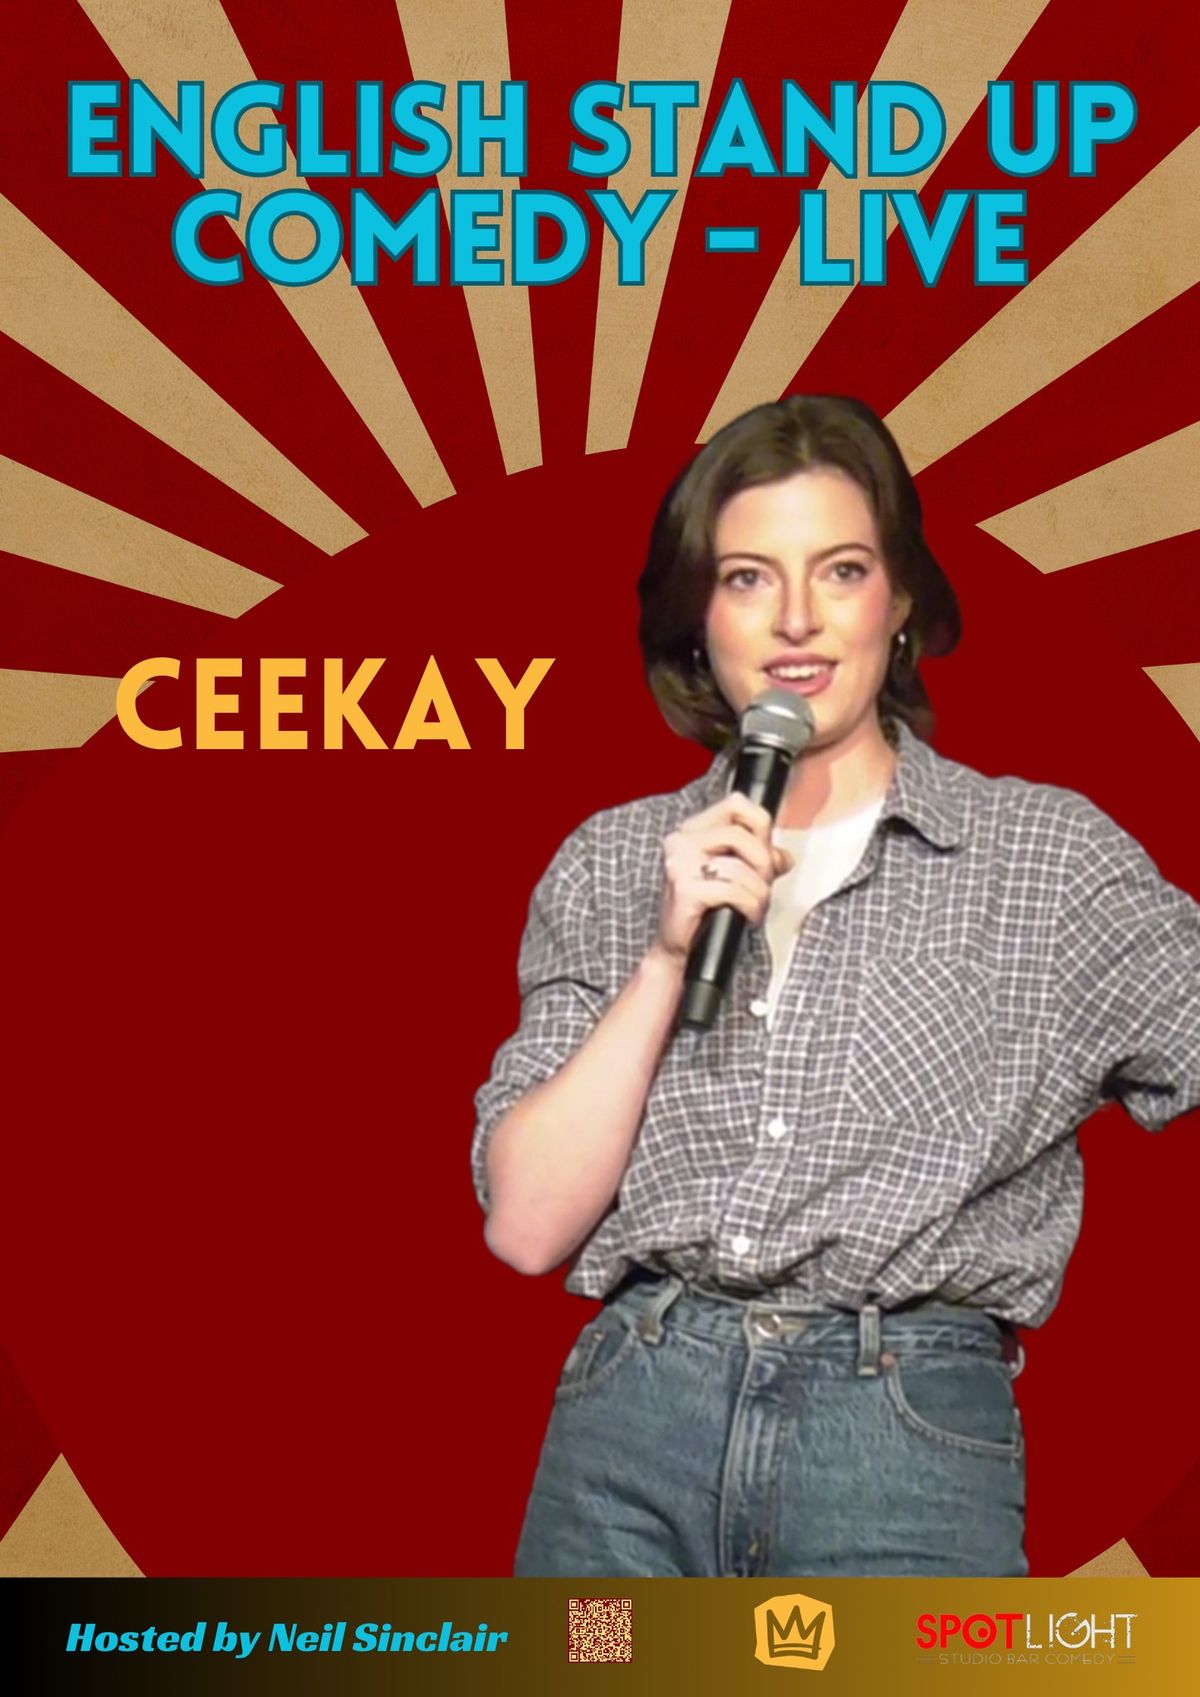 English Stand Up Comedy Lille - 27th June - Ceekay!